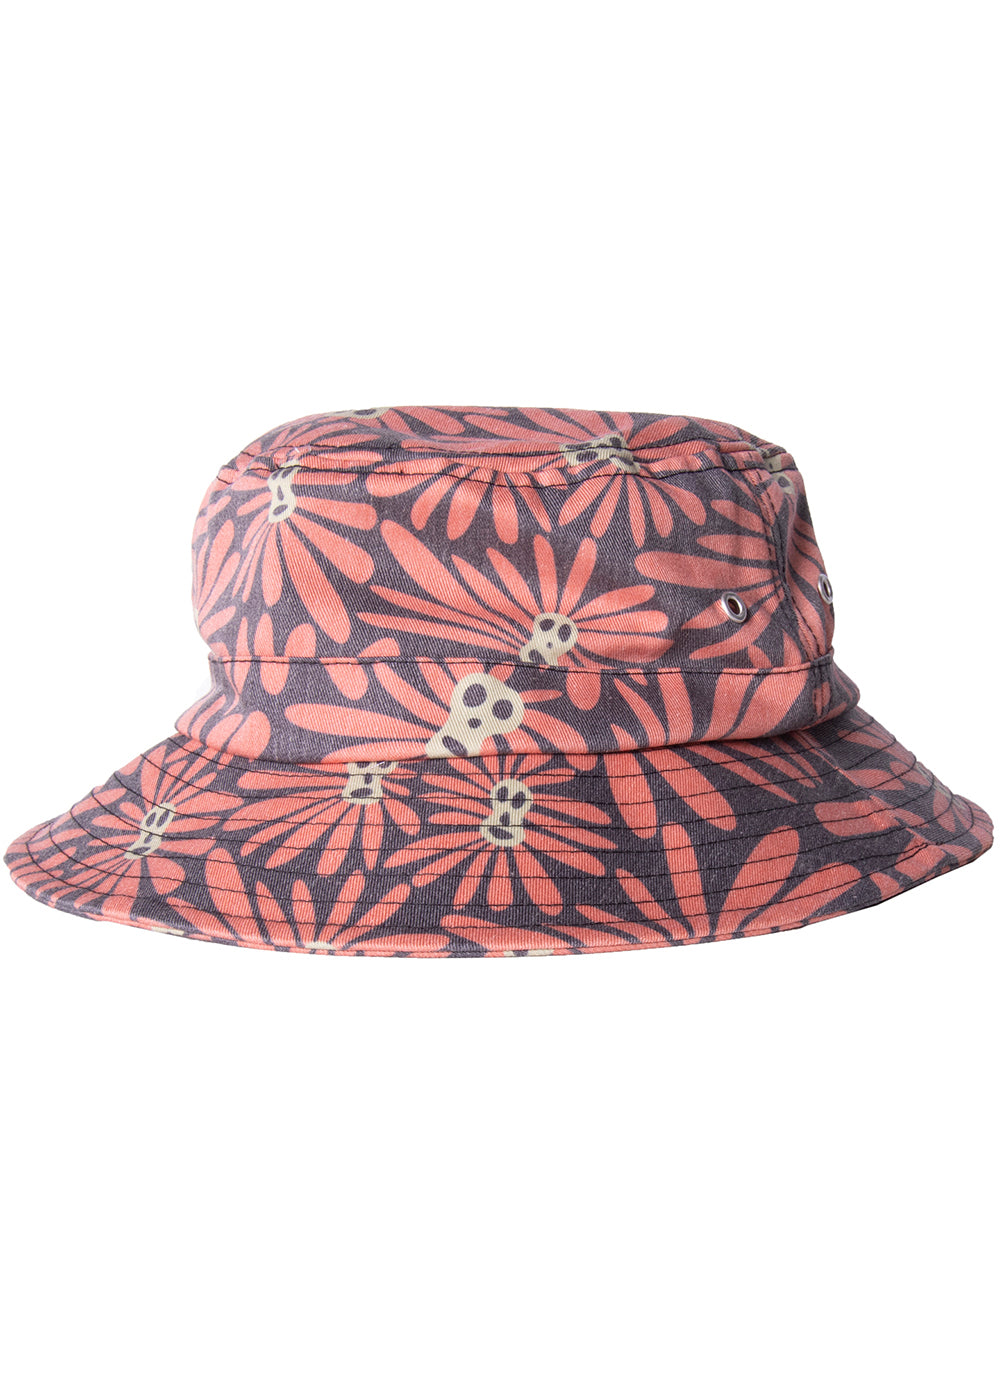 Red leather bucket hat - Muah's World Boutique